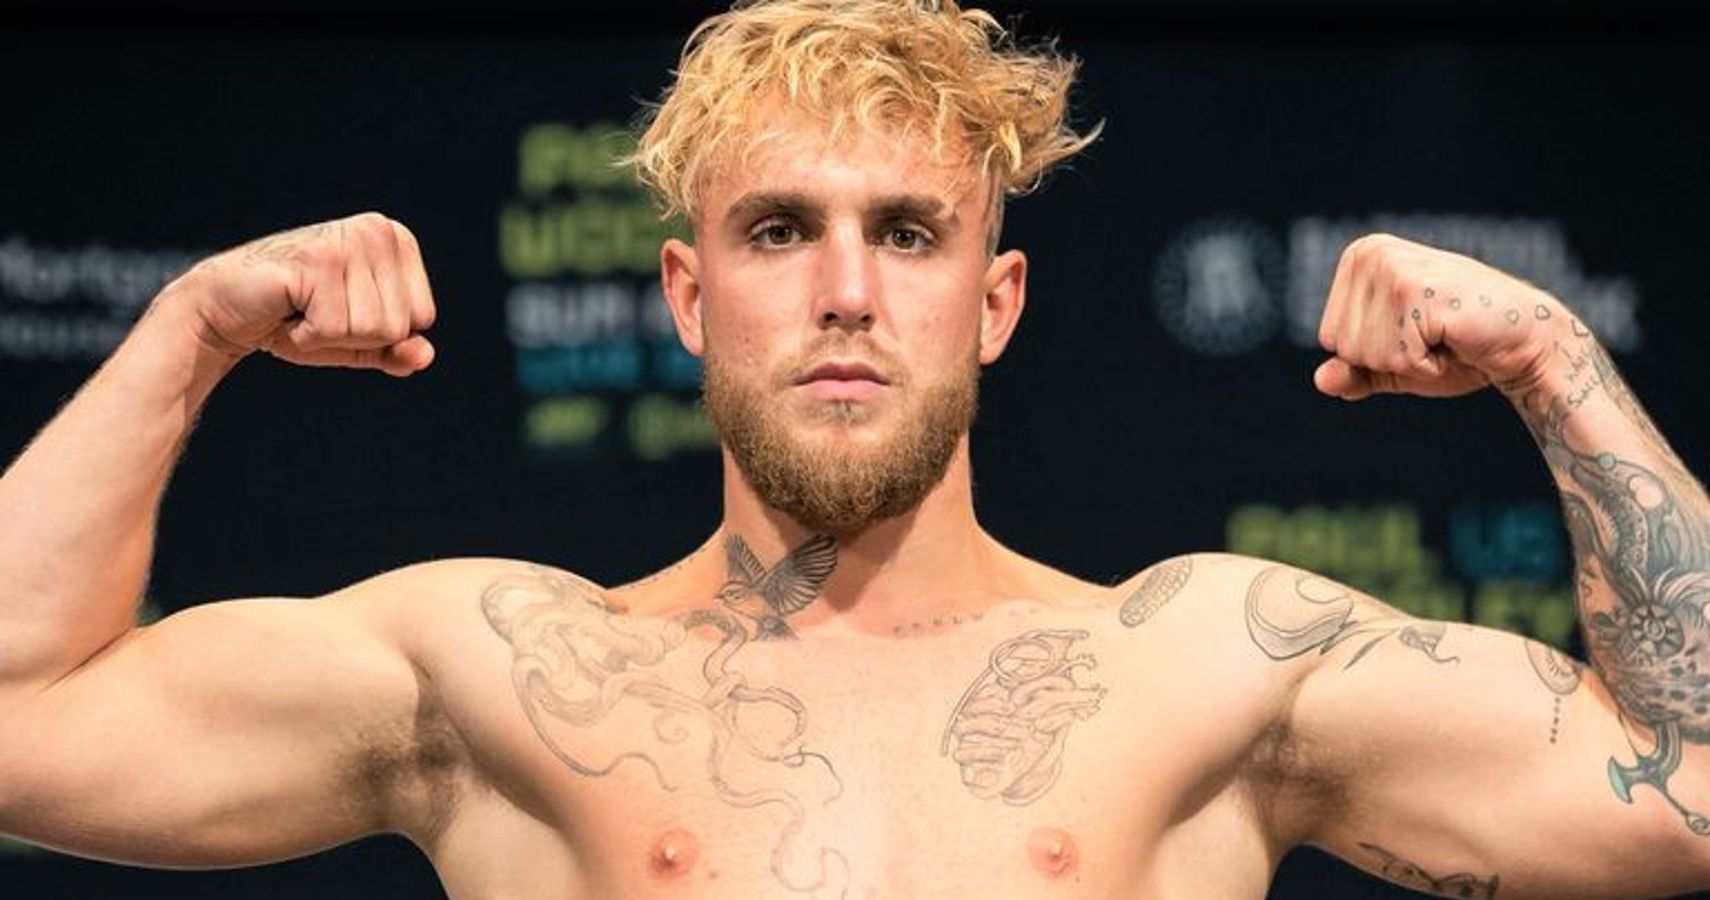 Jake Paul Offers NBA Star Draymond Green For Boxing Match For $10 Million